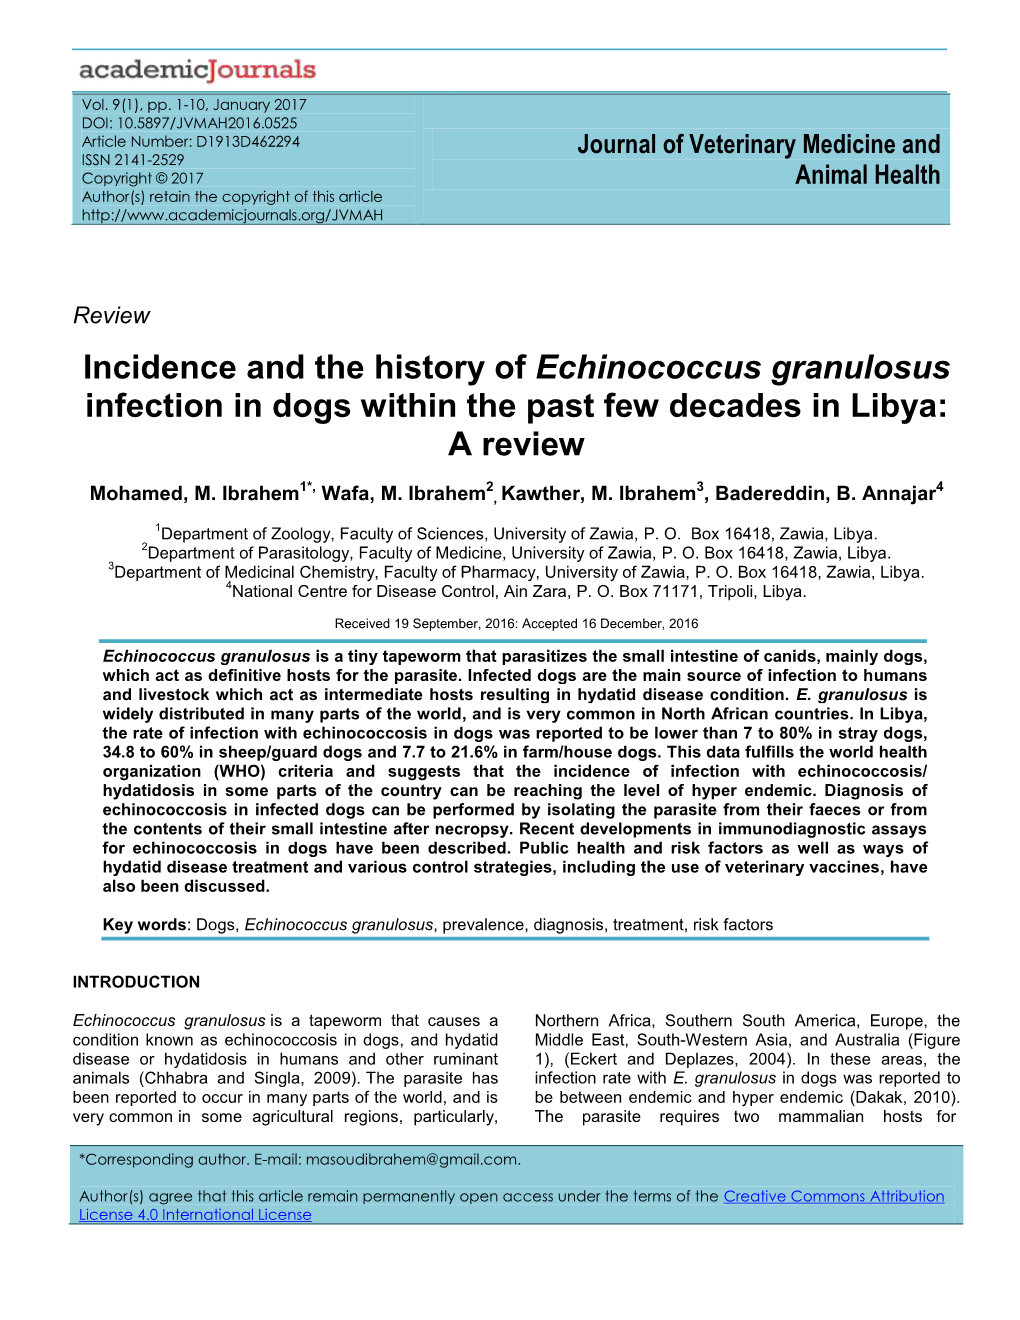 Incidence and the History of Echinococcus Granulosus Infection in Dogs Within the Past Few Decades in Libya: a Review